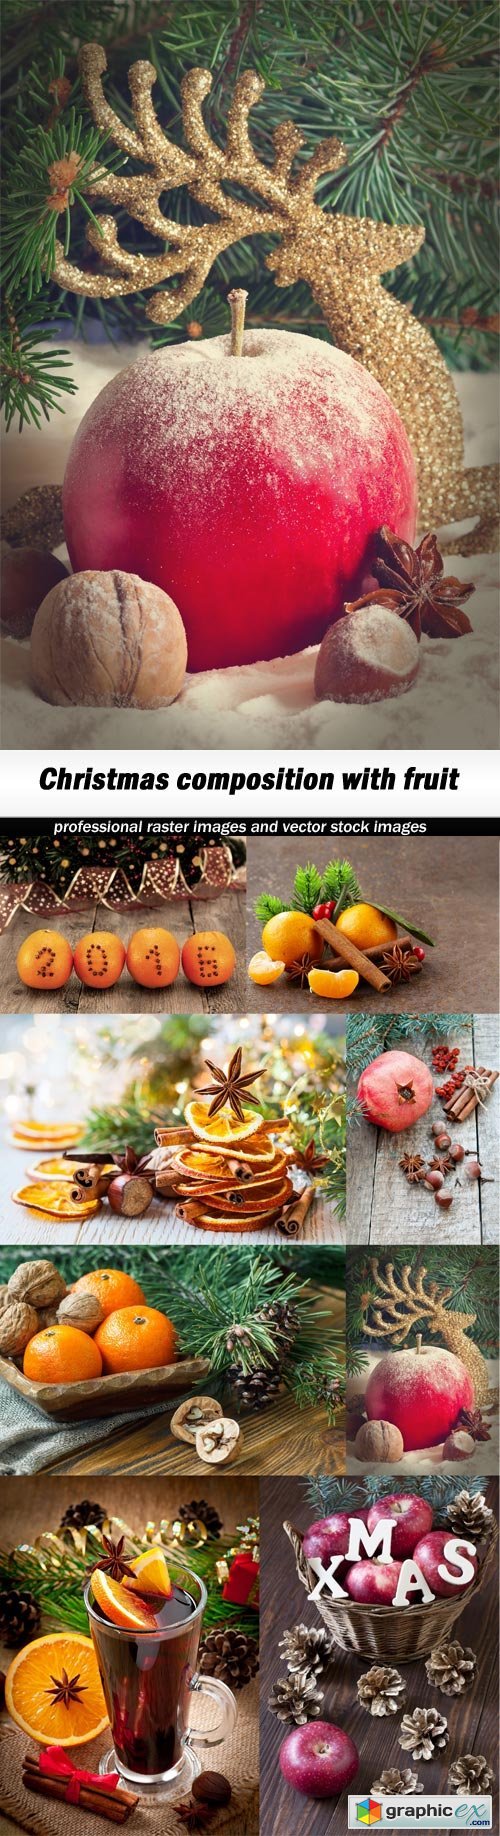 Christmas composition with fruit